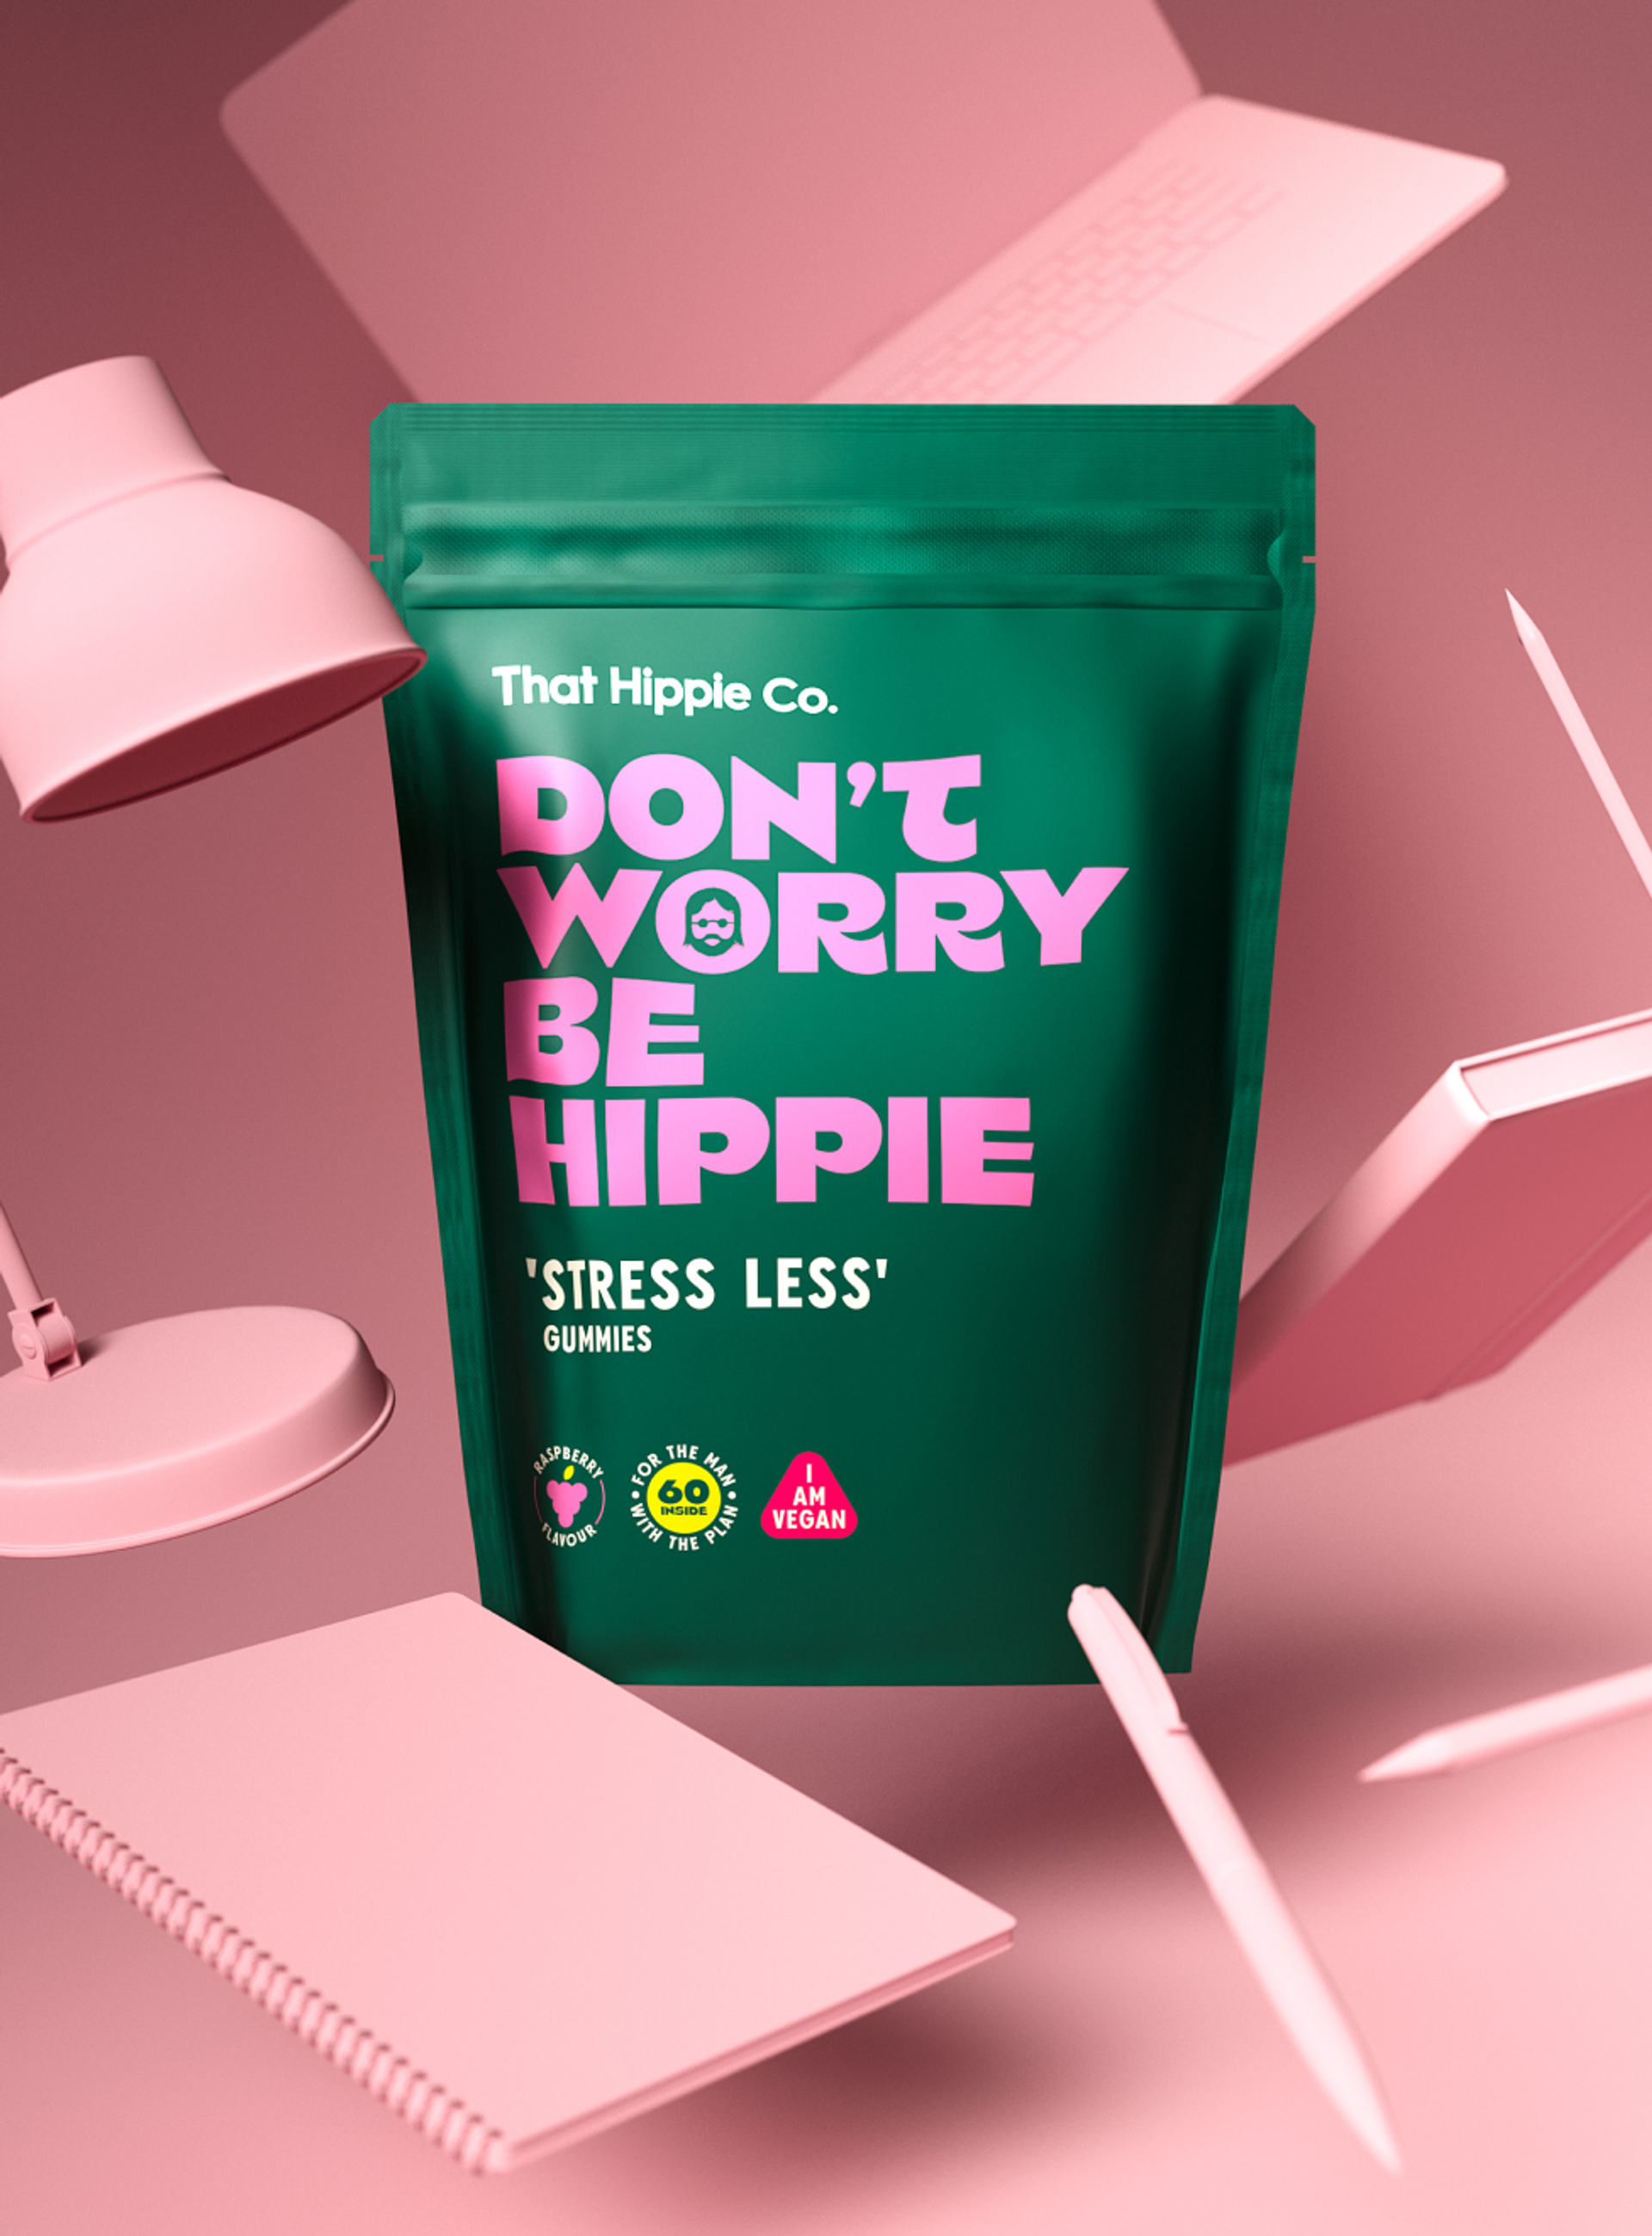 Gummies packaging design by branding agency in Australia Our Revolution for That Hippie Co supplement brand with pastel pink office accessories for vegan “Stress Less” gummies featuring brand slogan “Don’t worry be hippie”.